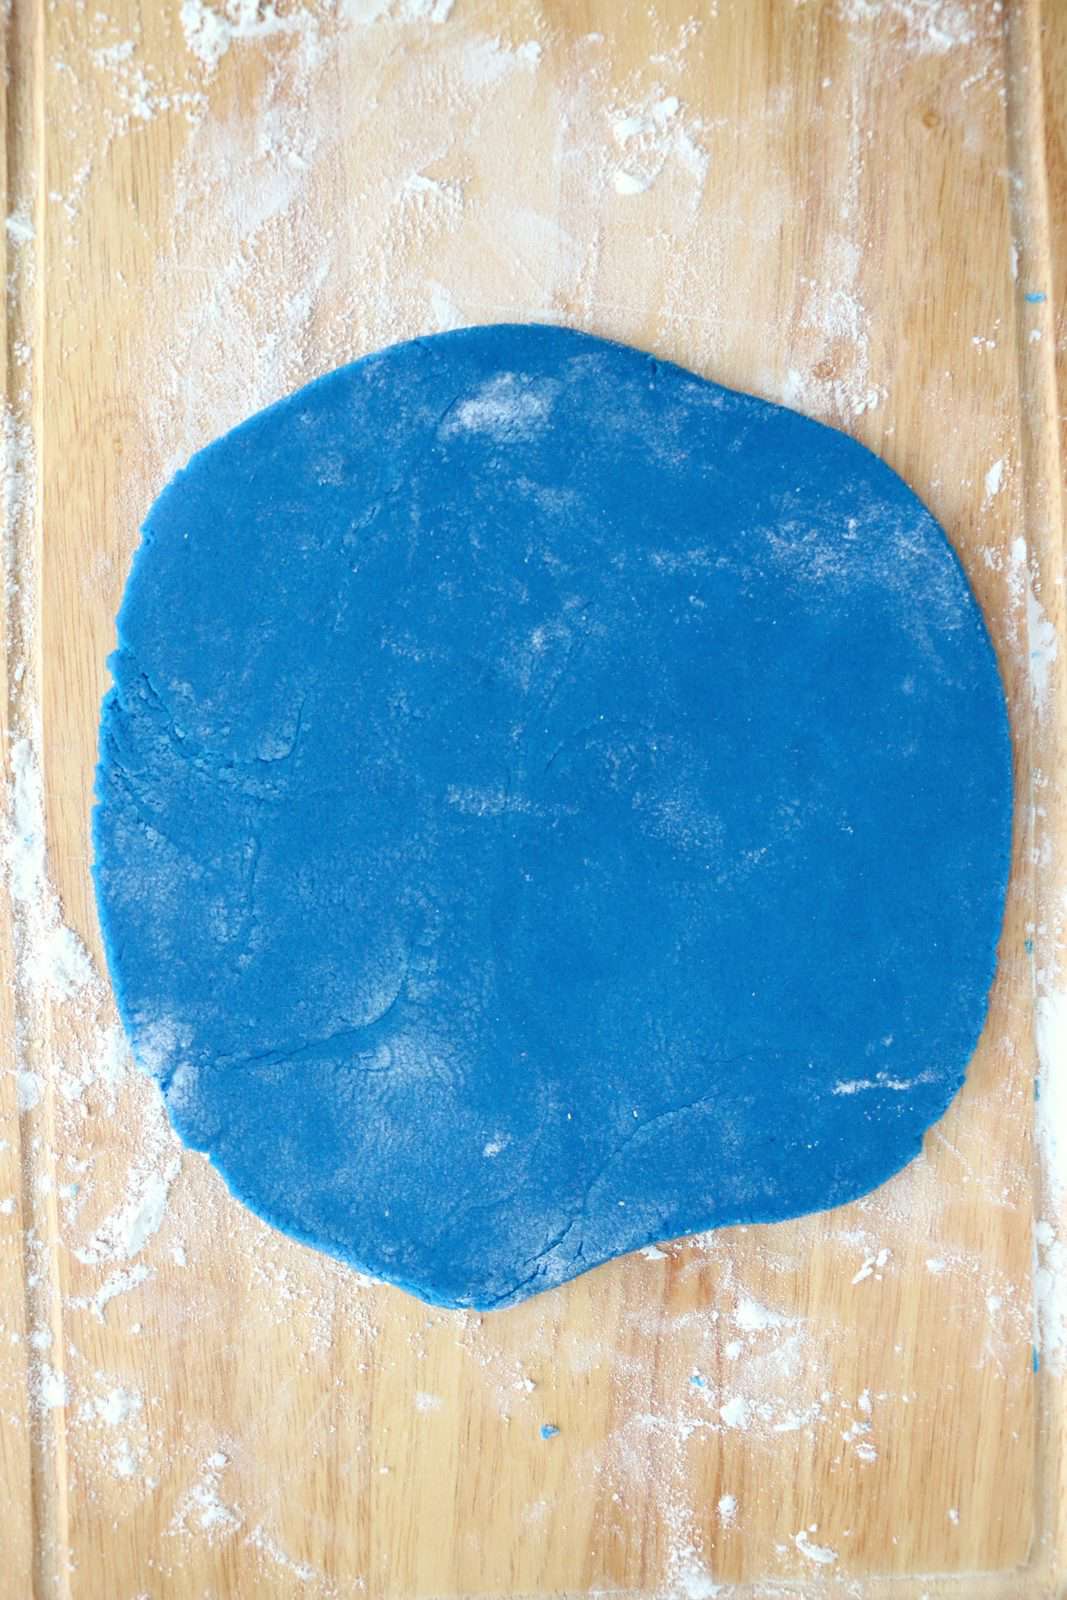 Blue dough rolled out into a square.